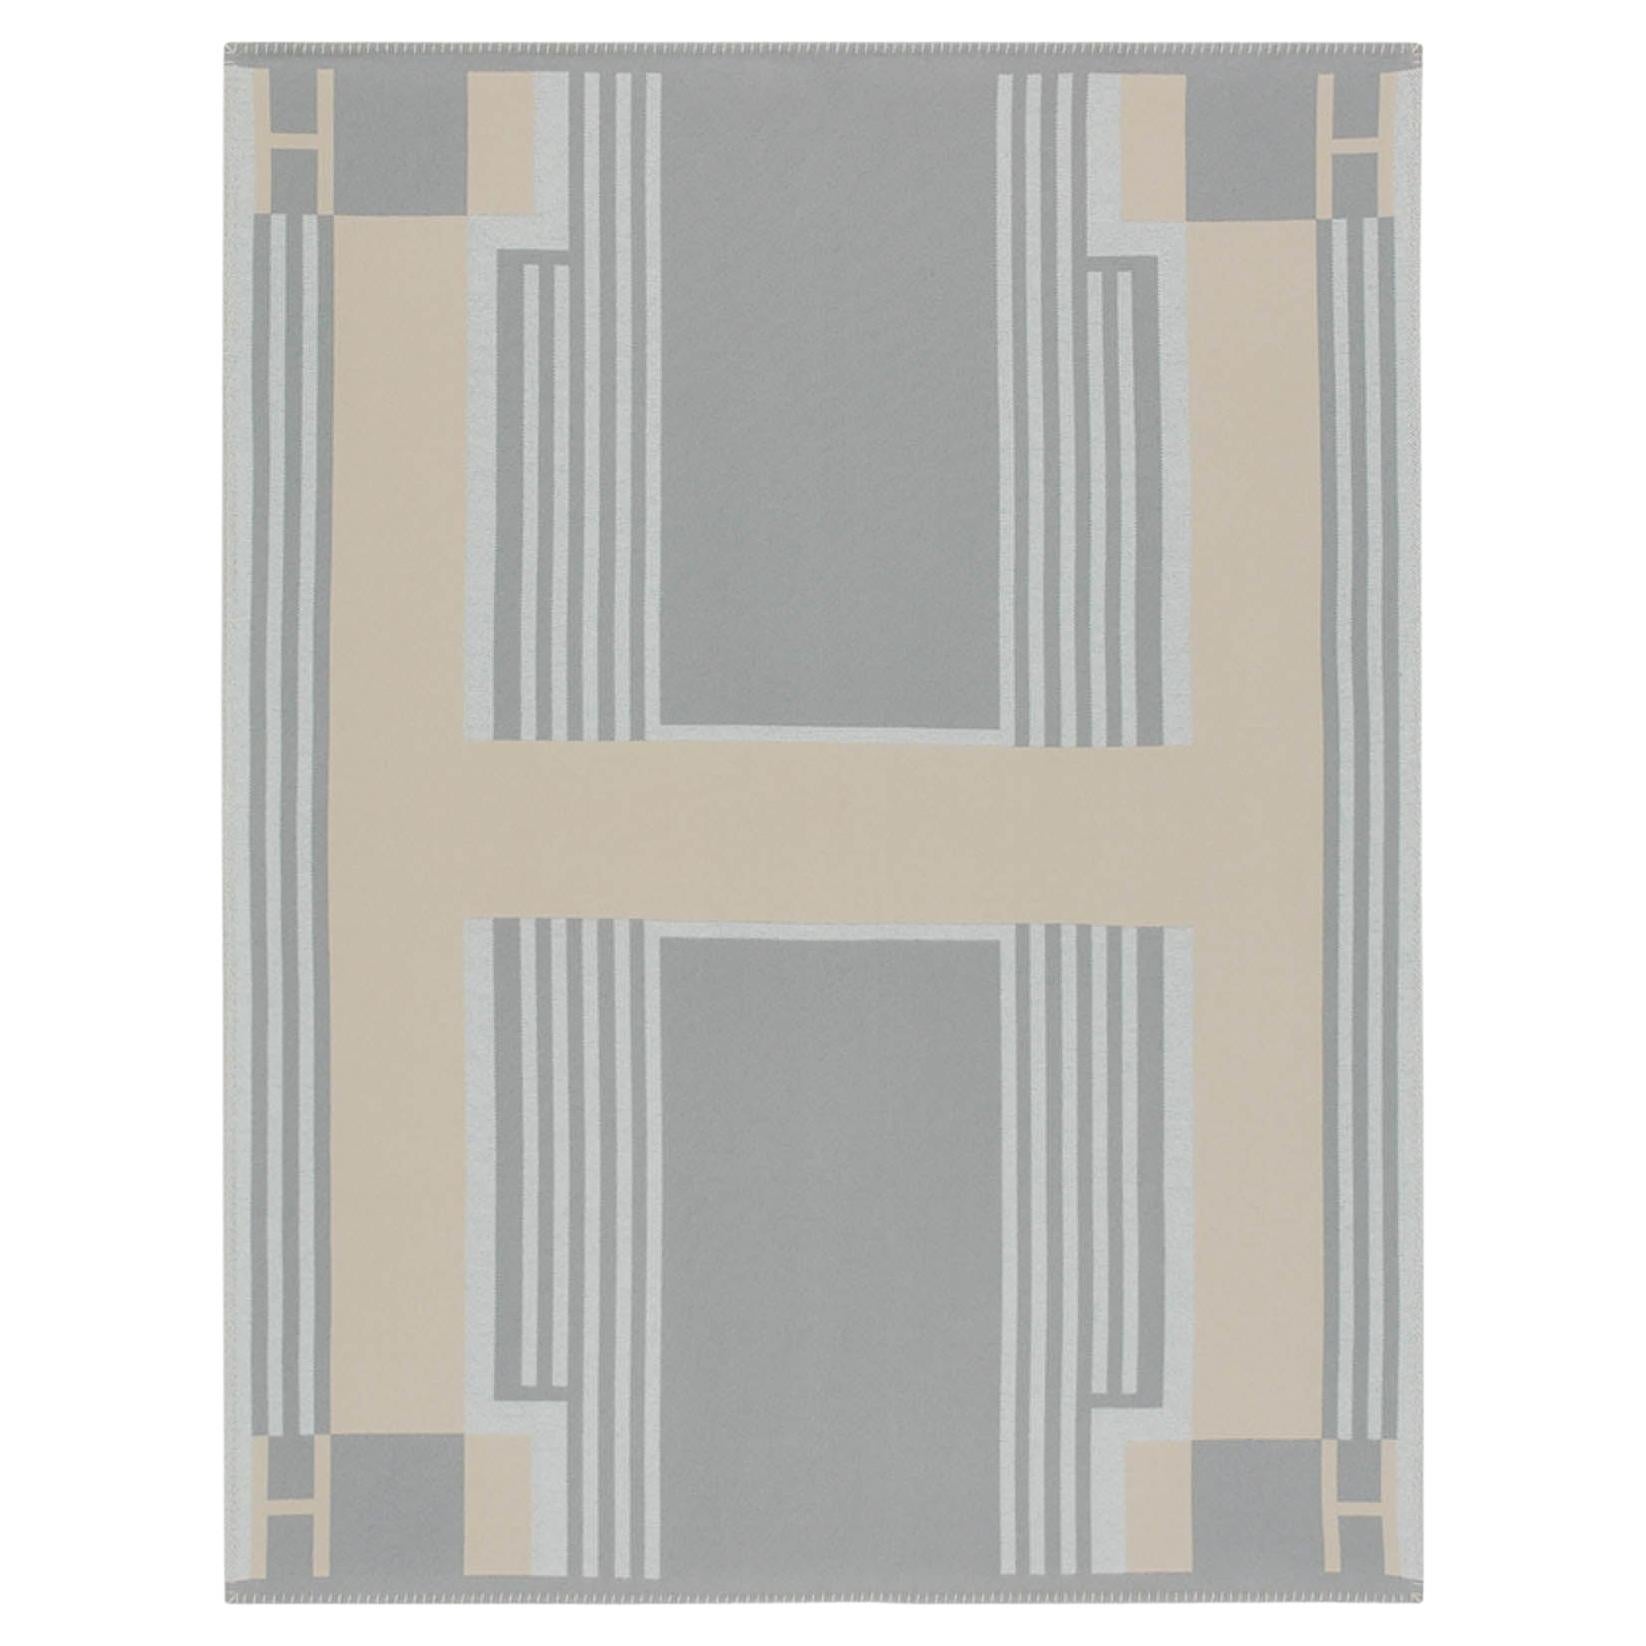 Hermes Ithaque Blanket Gris Perle Wool and Cashmere